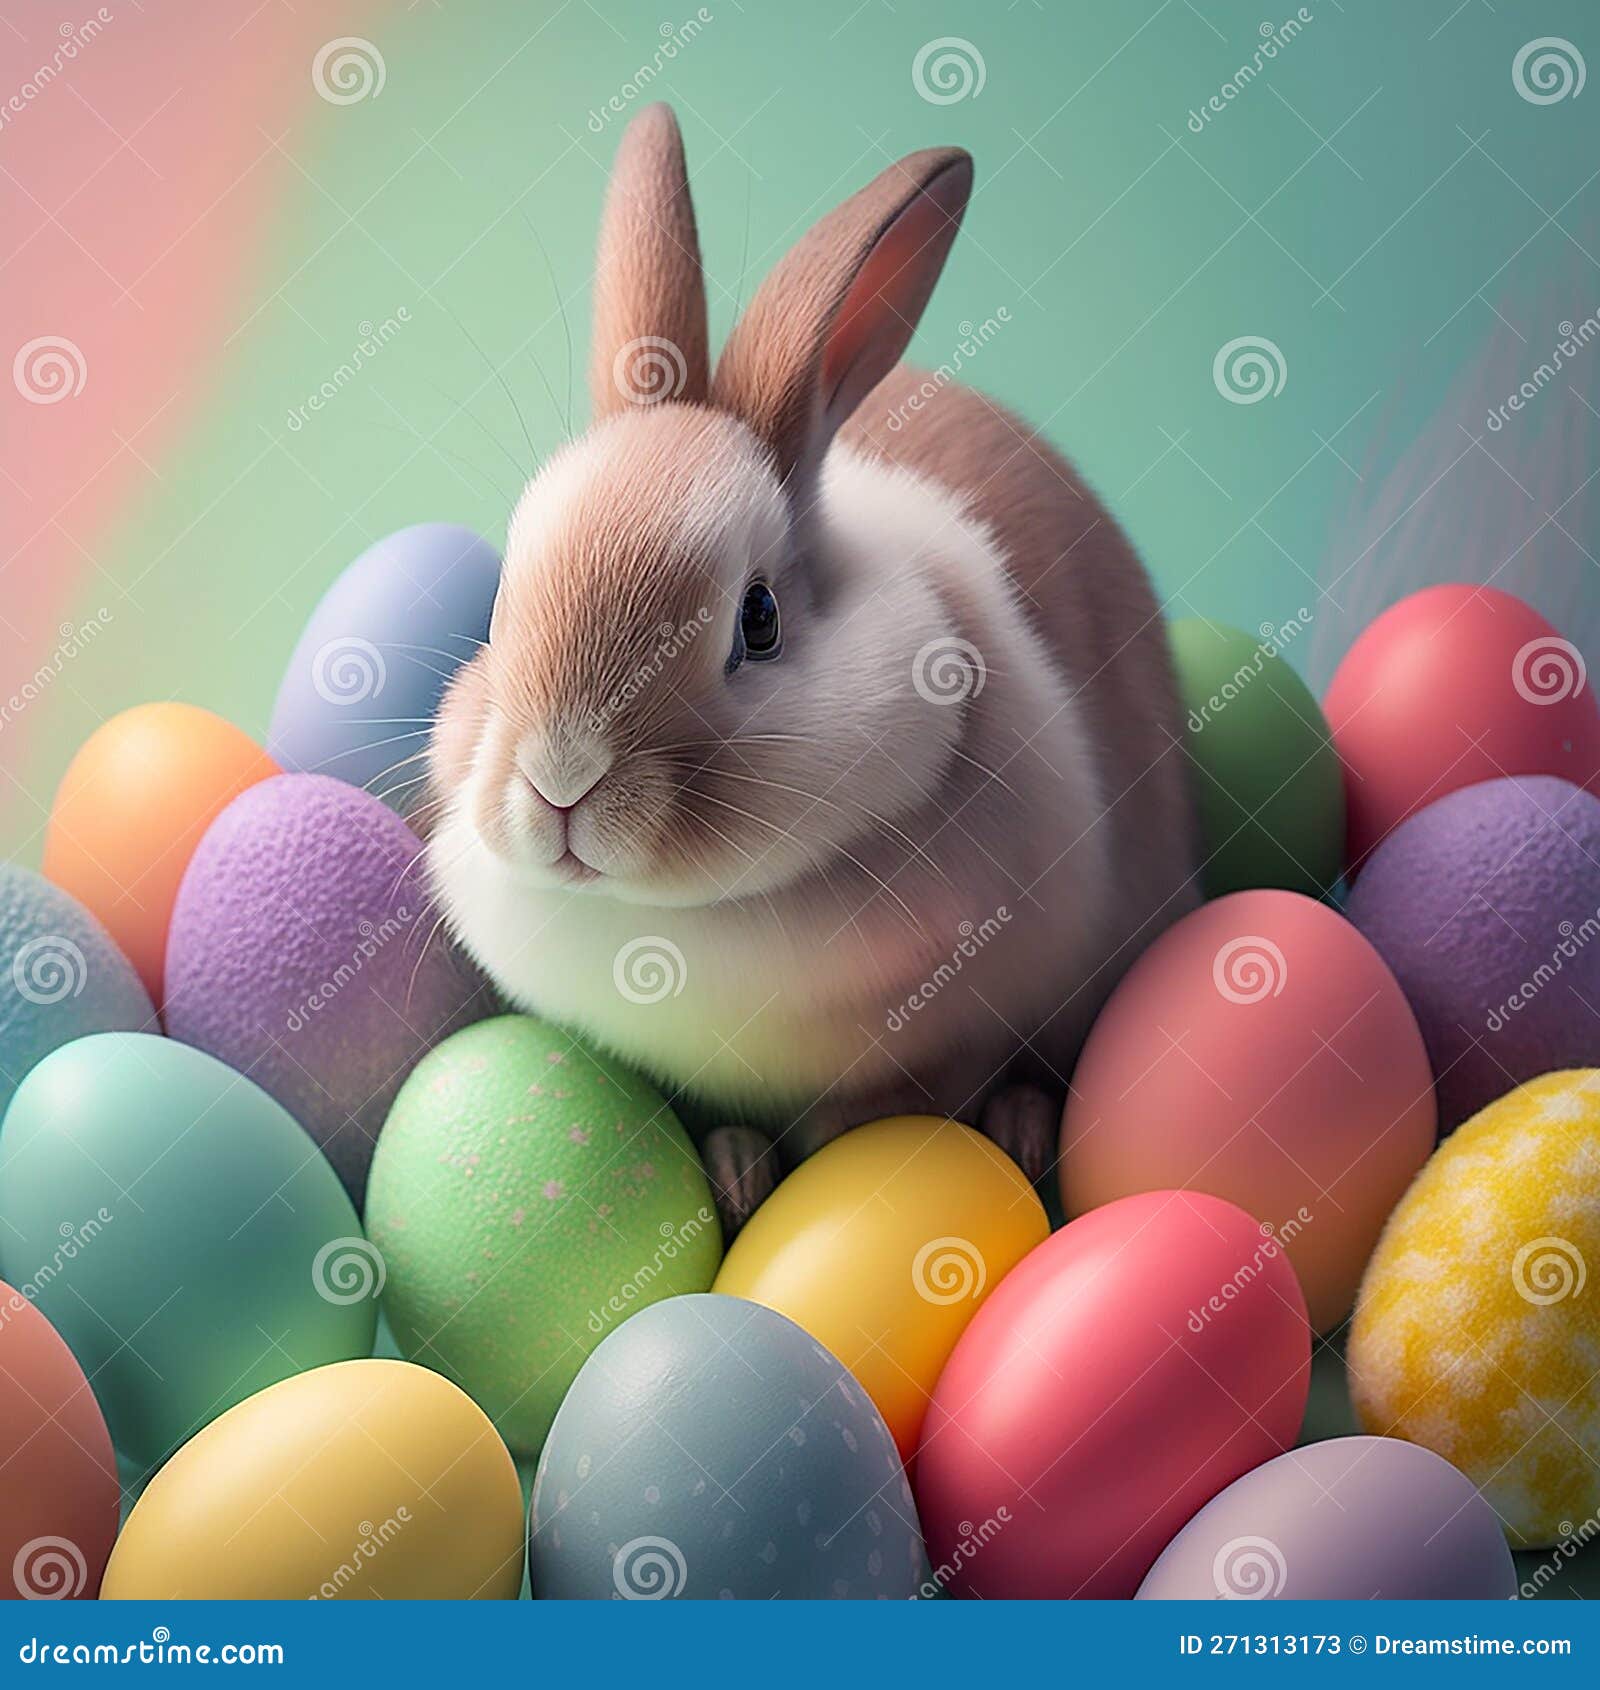 Cute Easter Bunny in the Middle of Small Easter Eggs in Pastel Tones ...